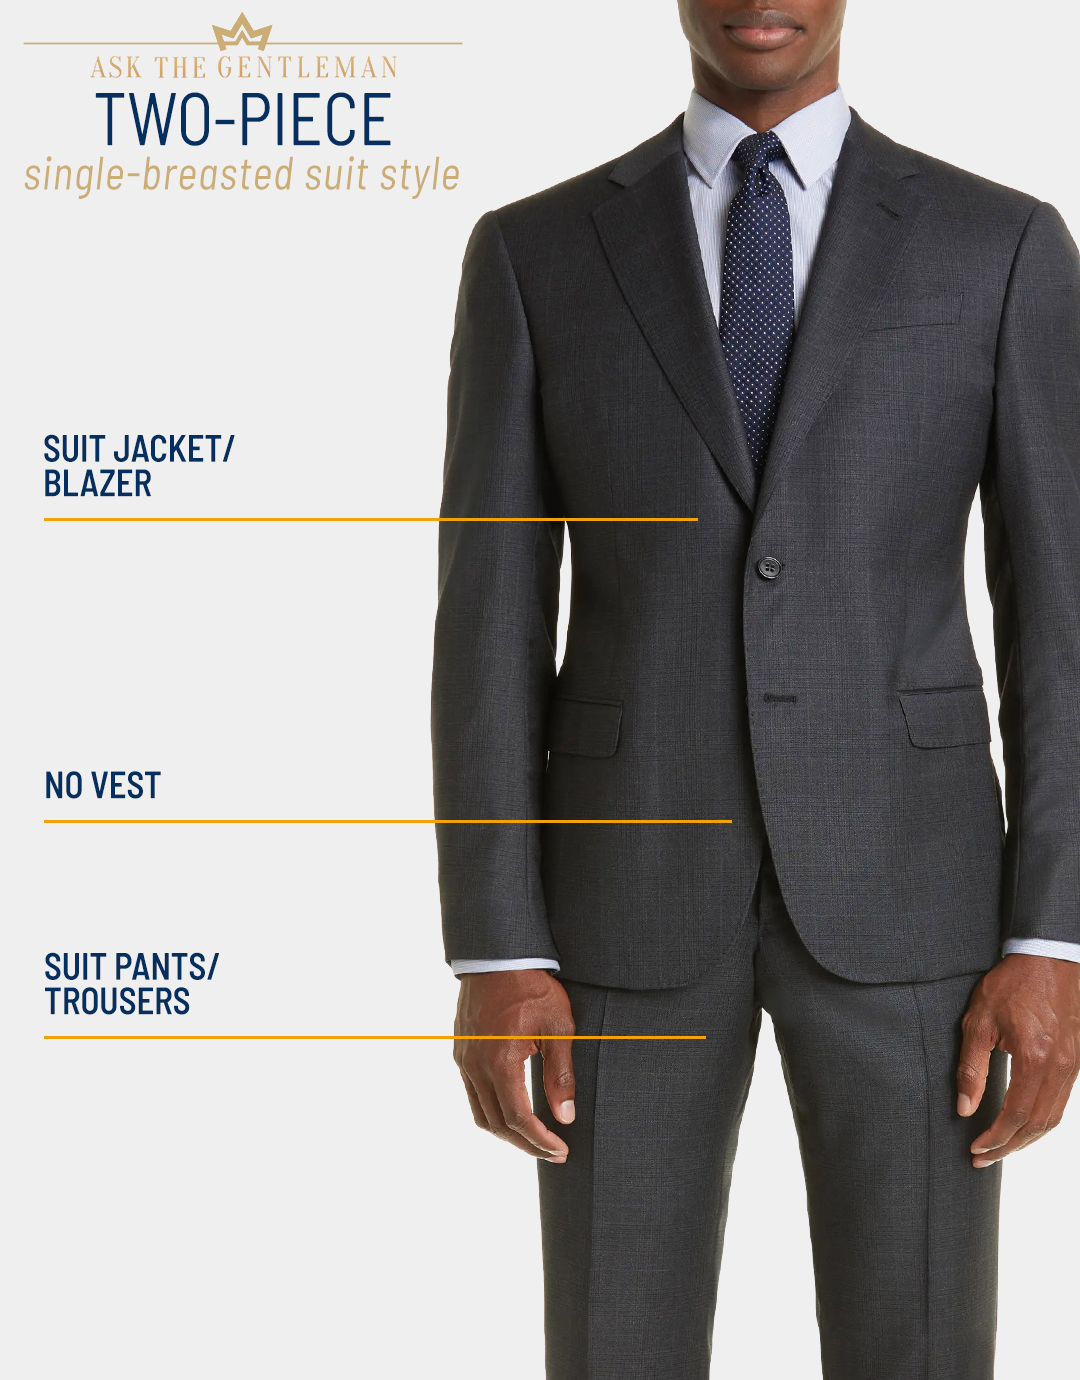 Single-breasted two-piece suit style